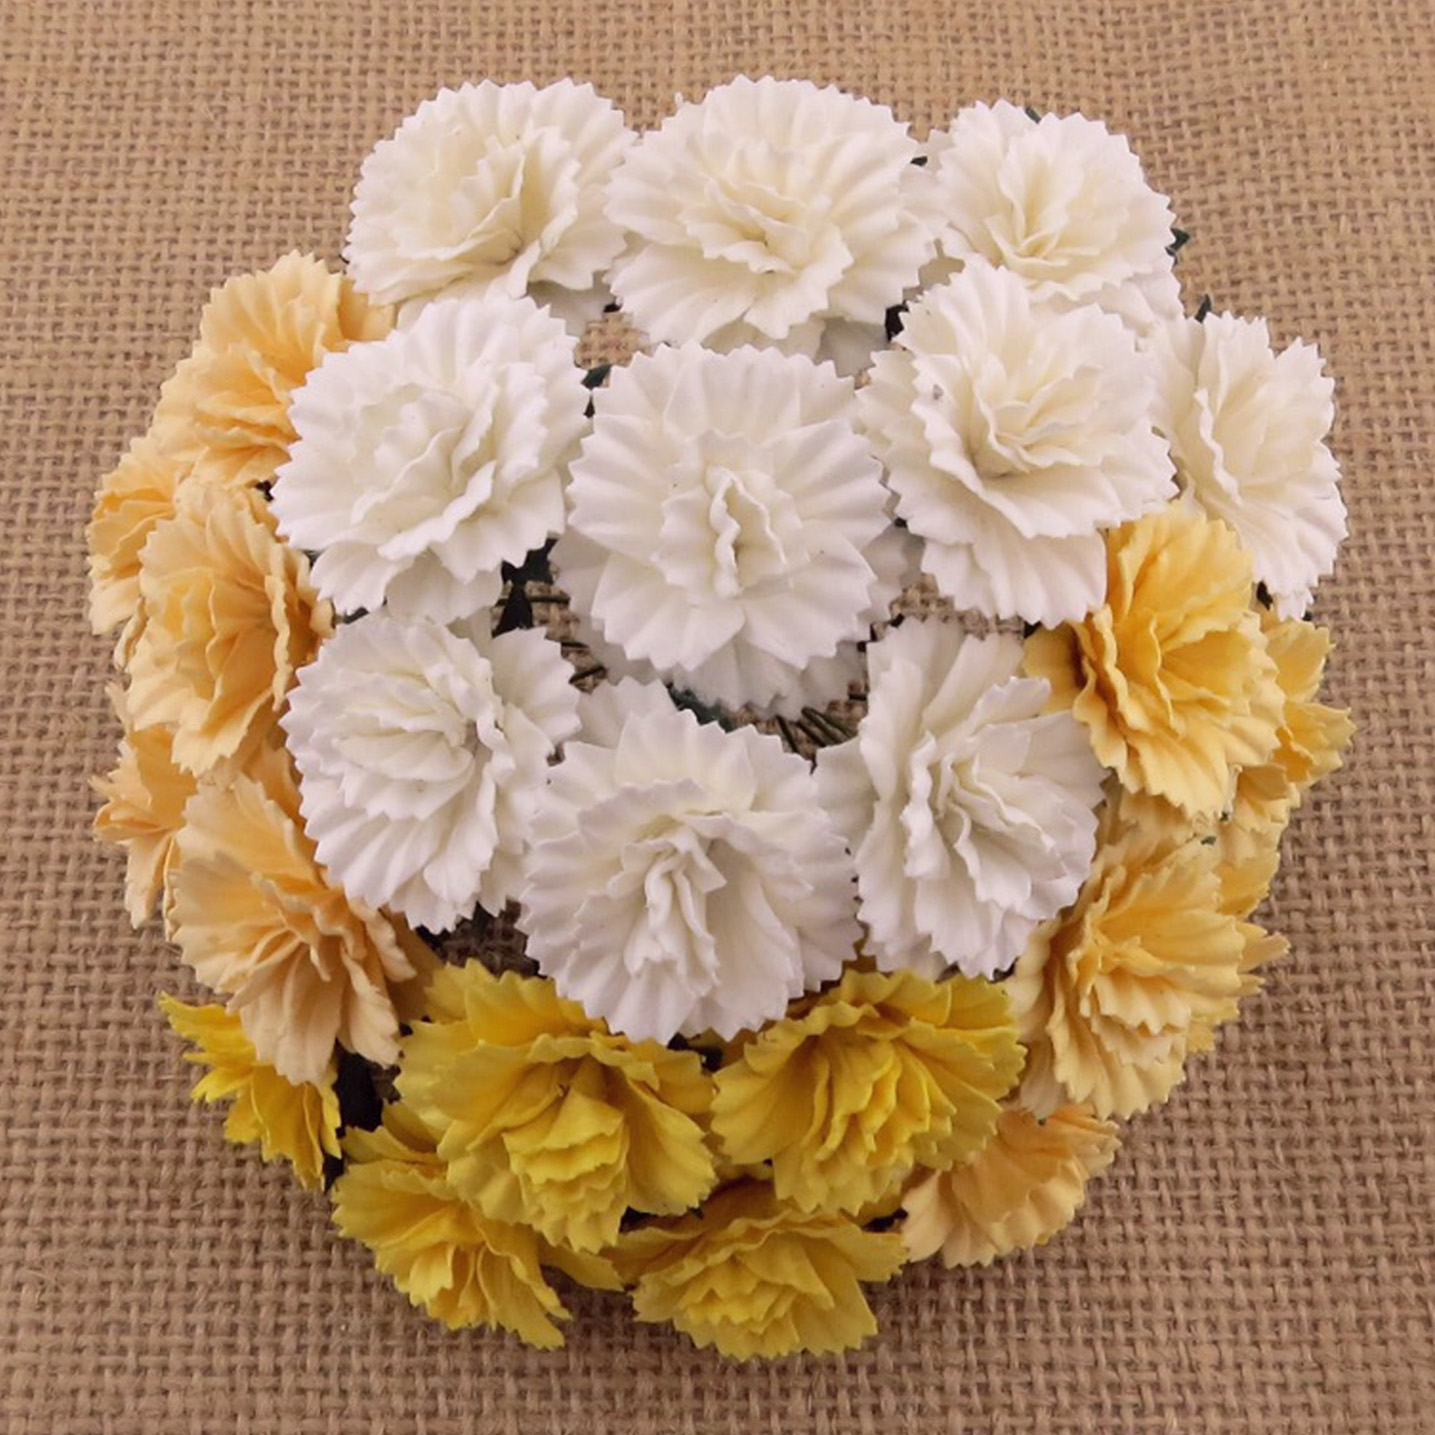 50 WHITE/CREAM MULBERRY PAPER CARNATION FLOWERS